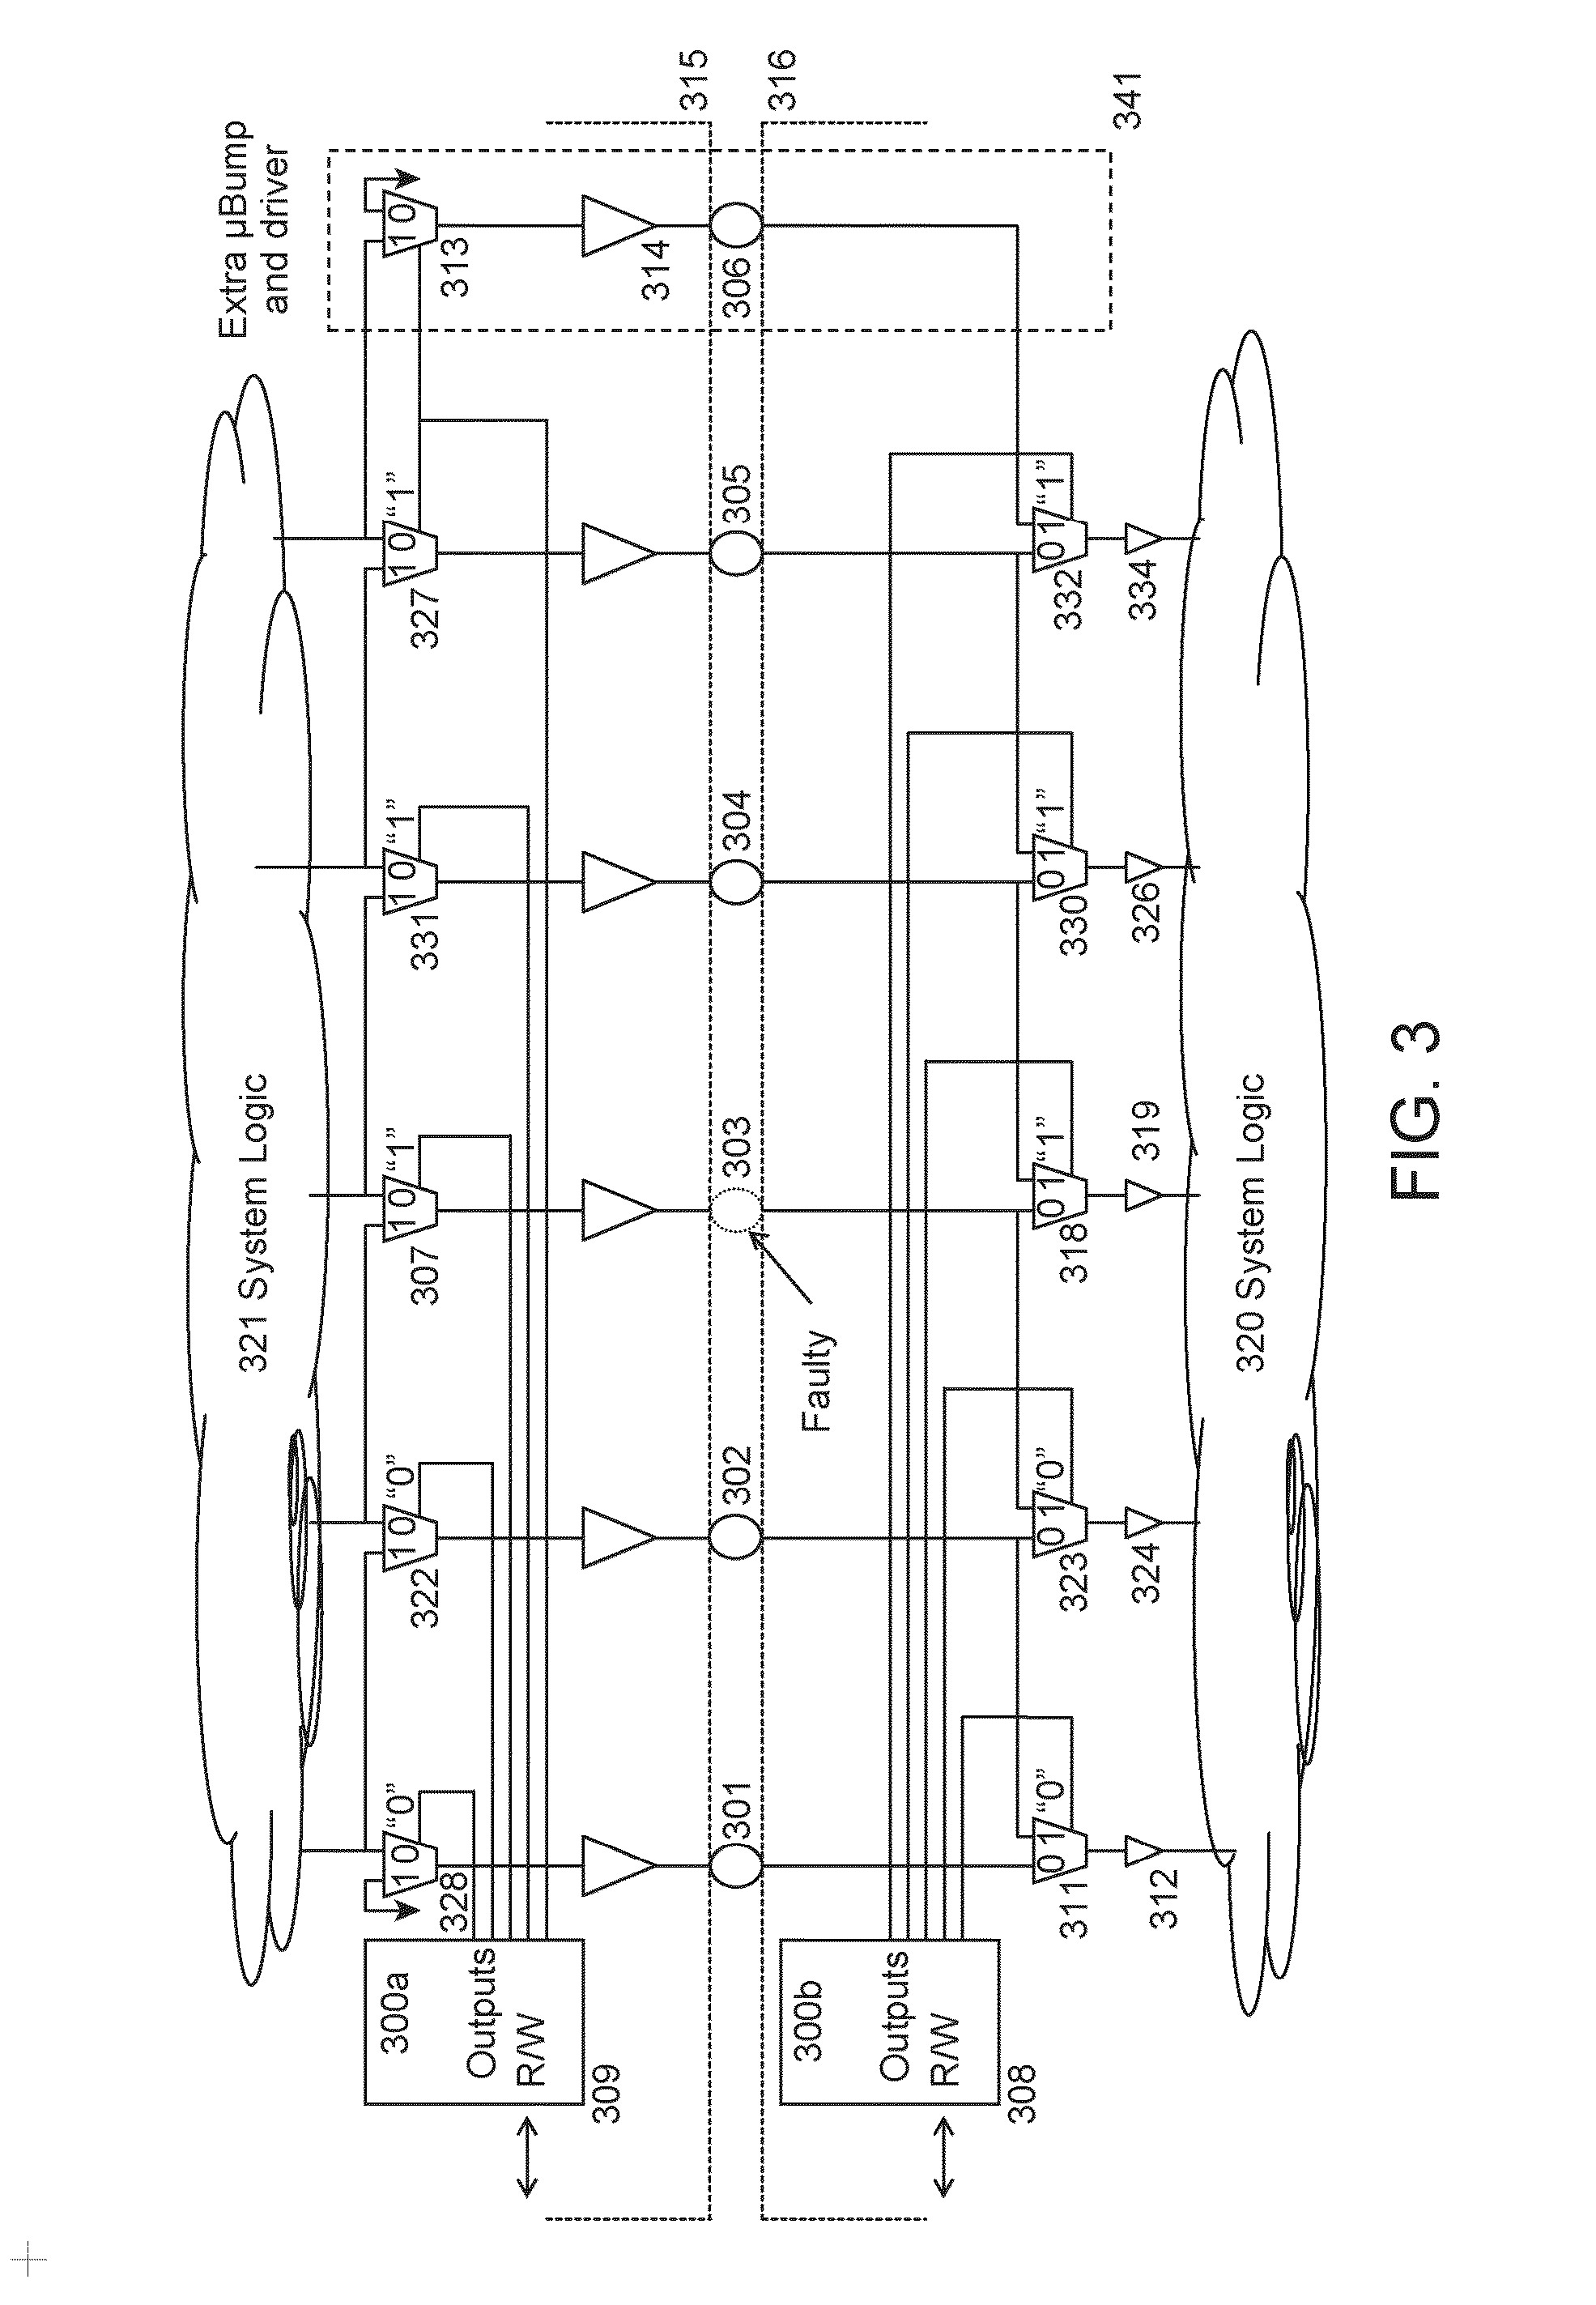 Method and apparatus for self-annealing multi-die interconnect redundancy control